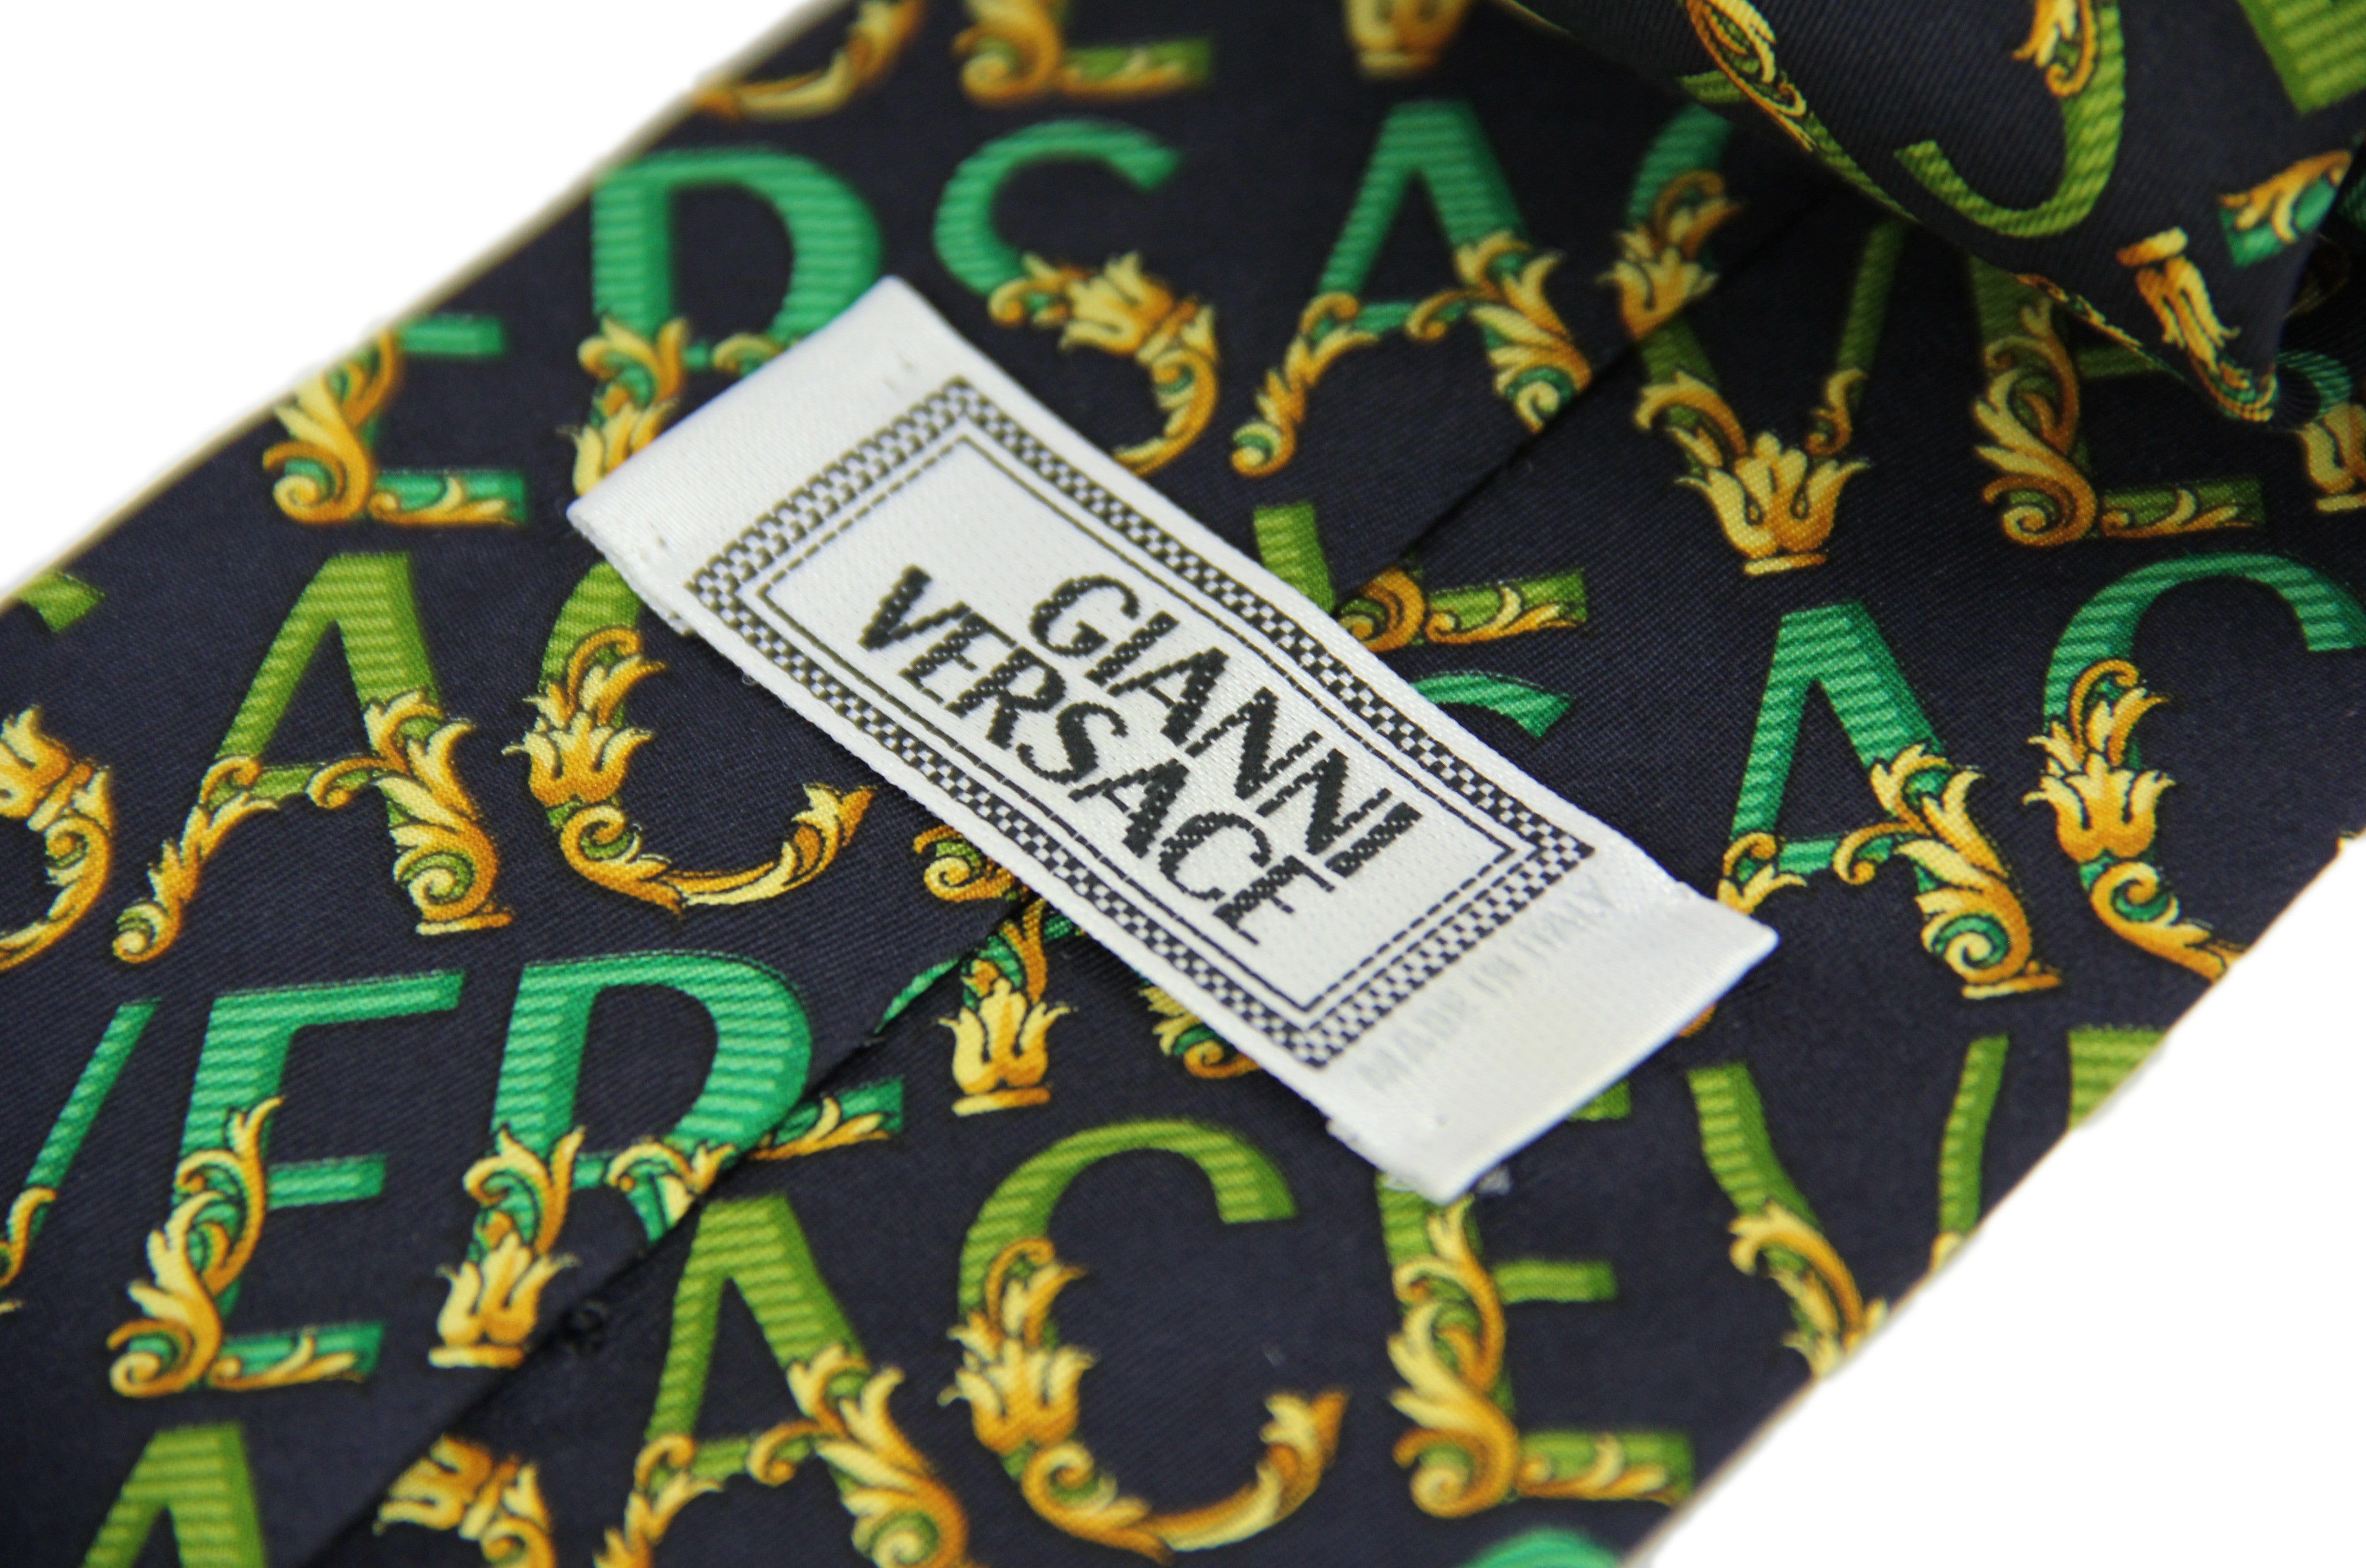 Gianni Versace Vintage Silk Tie With Brand Motif in Baroque Style - secondfirst